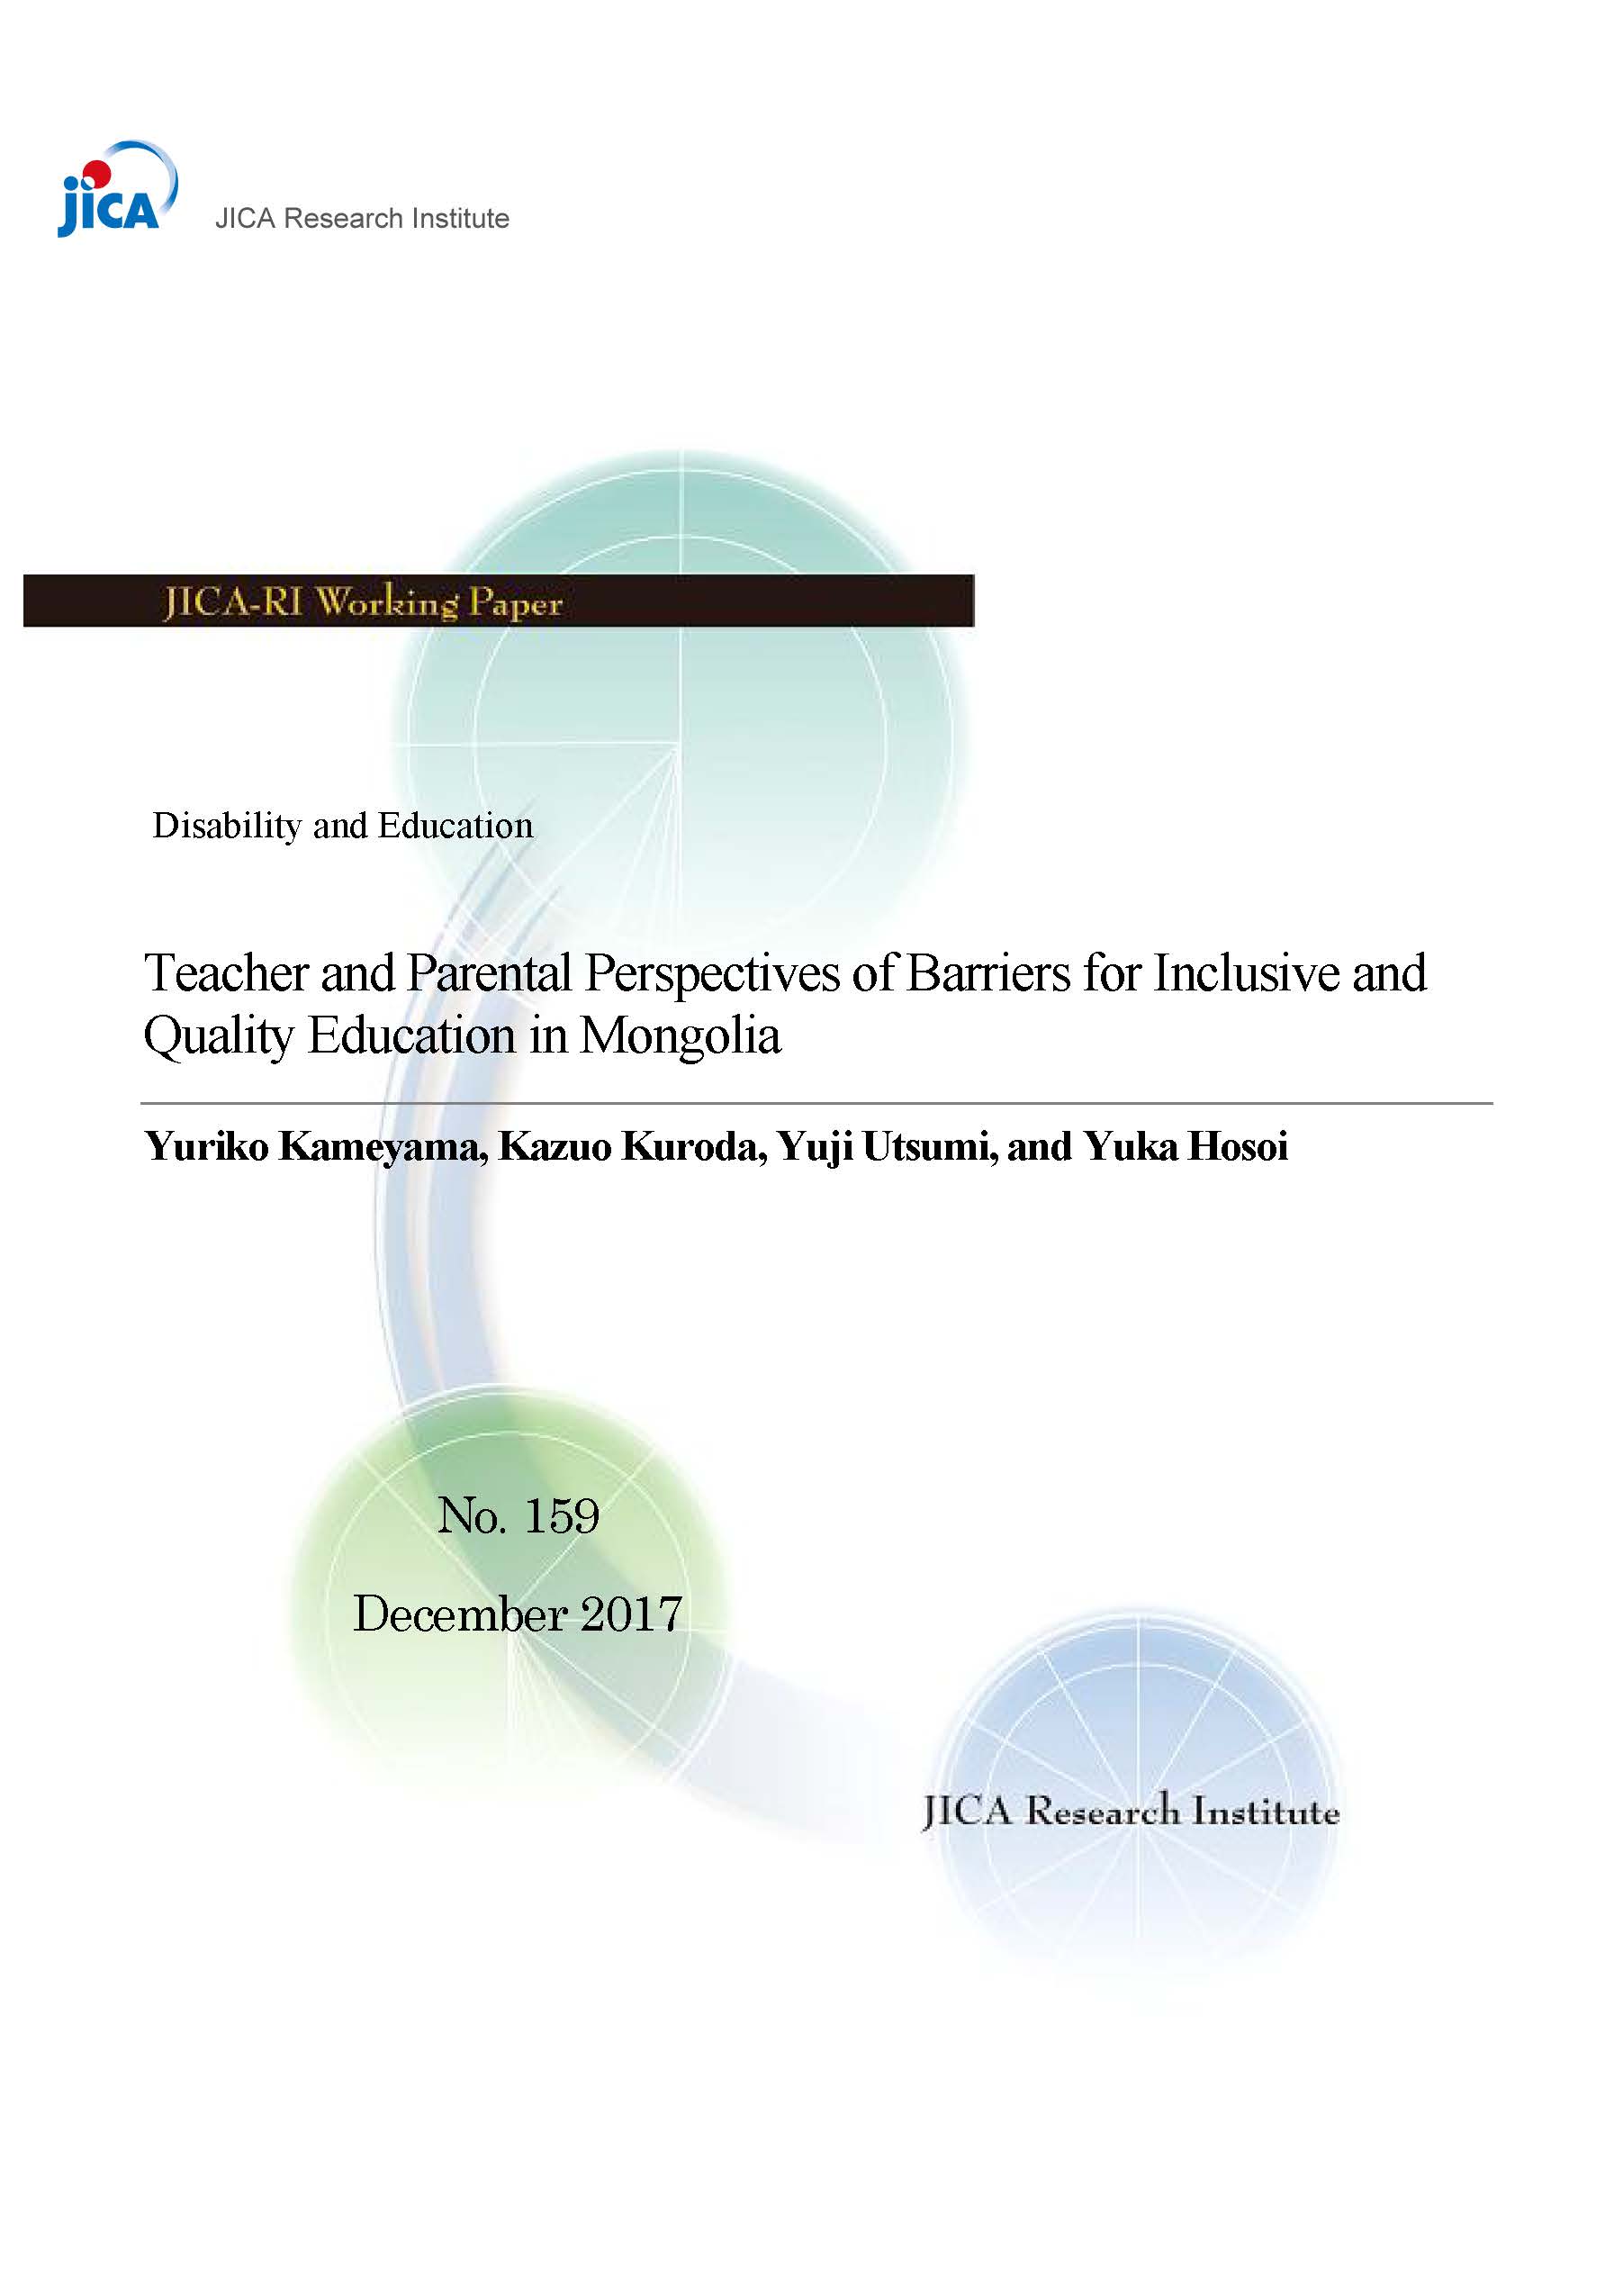 Teacher and Parental Perspectives of Barriers for Inclusive and Quality Education in Mongolia